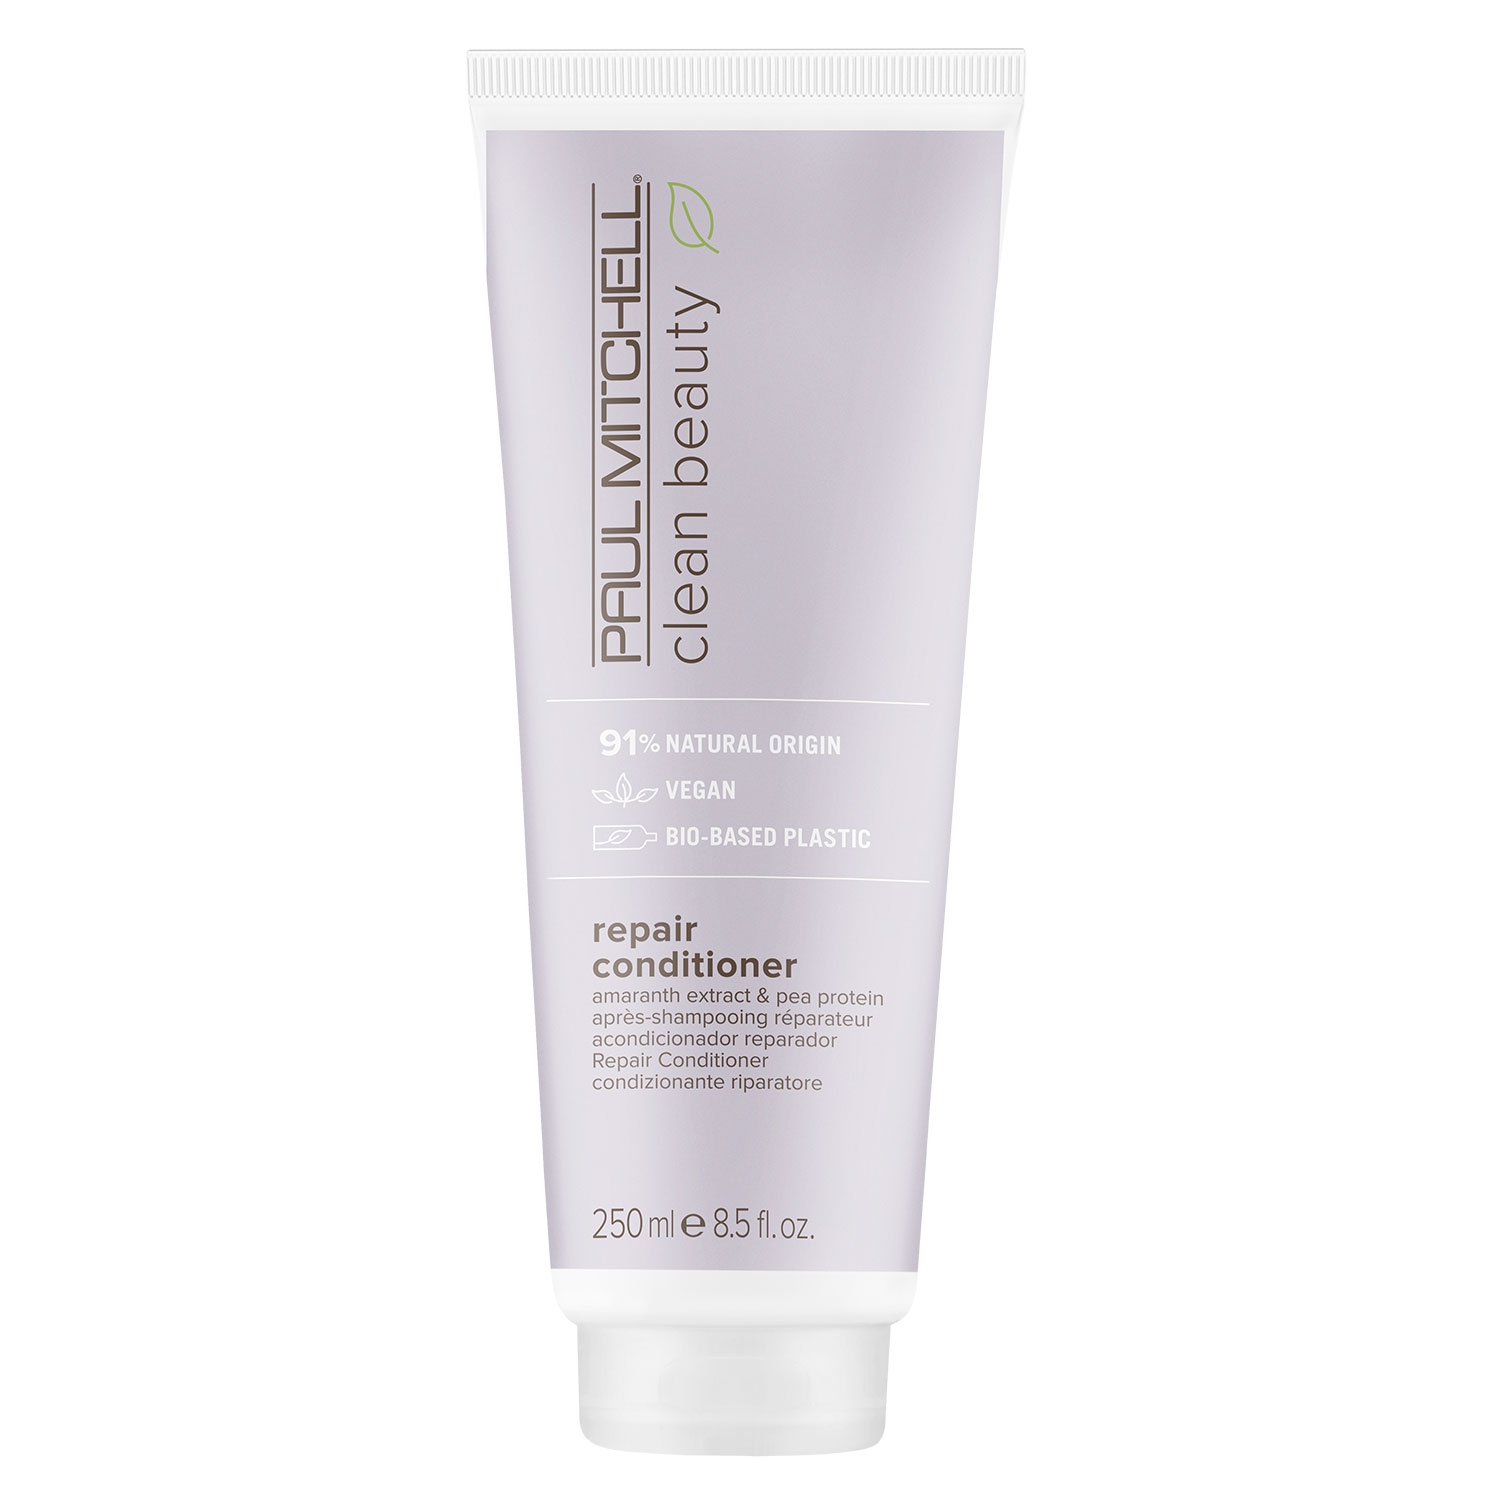 Product image from Paul Mitchell Clean Beauty - Repair Conditioner